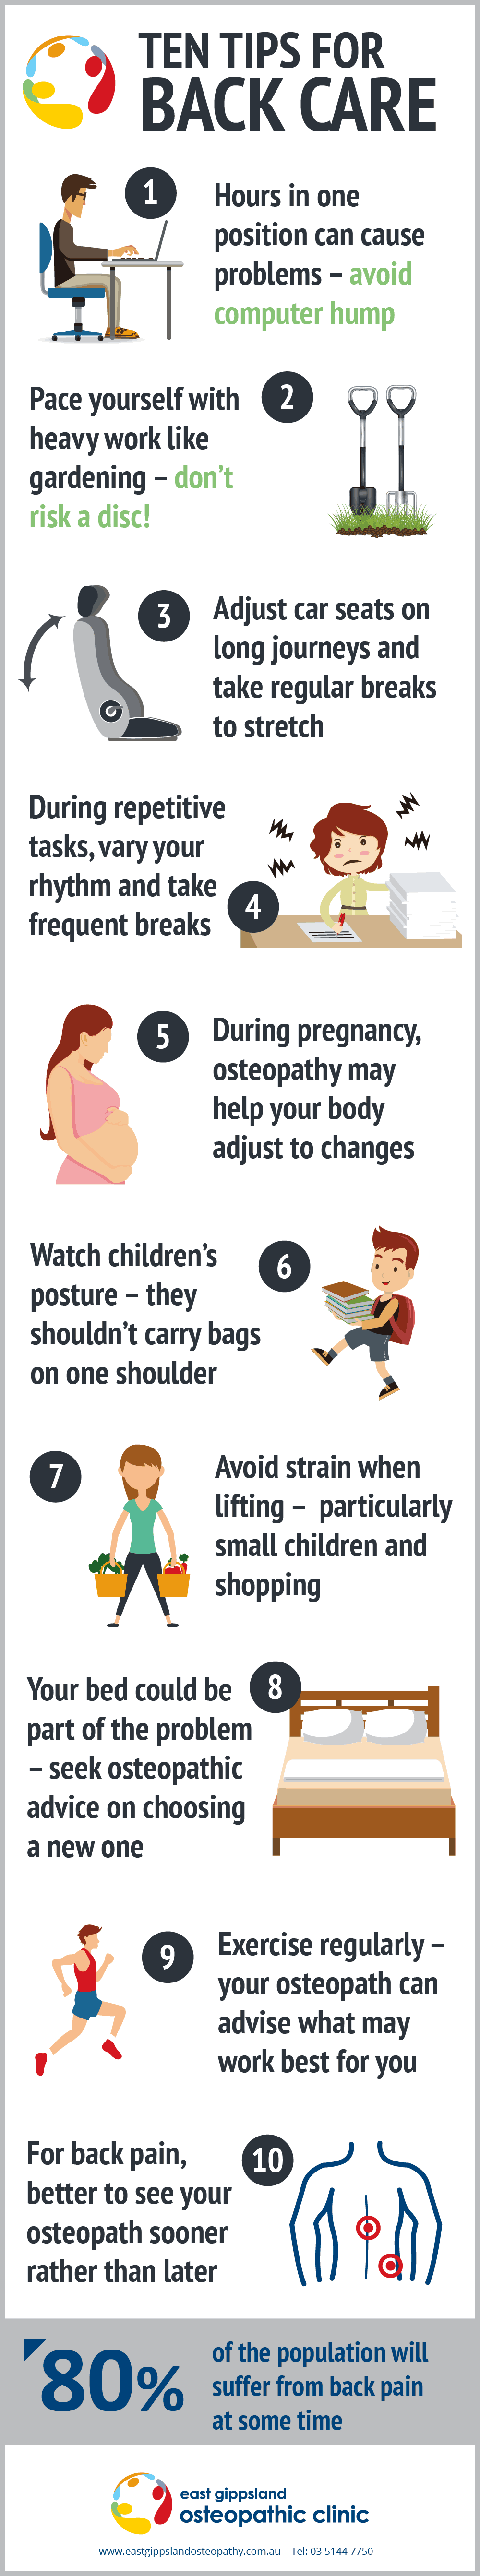 INFOGRAPHIC - ten tips for back care